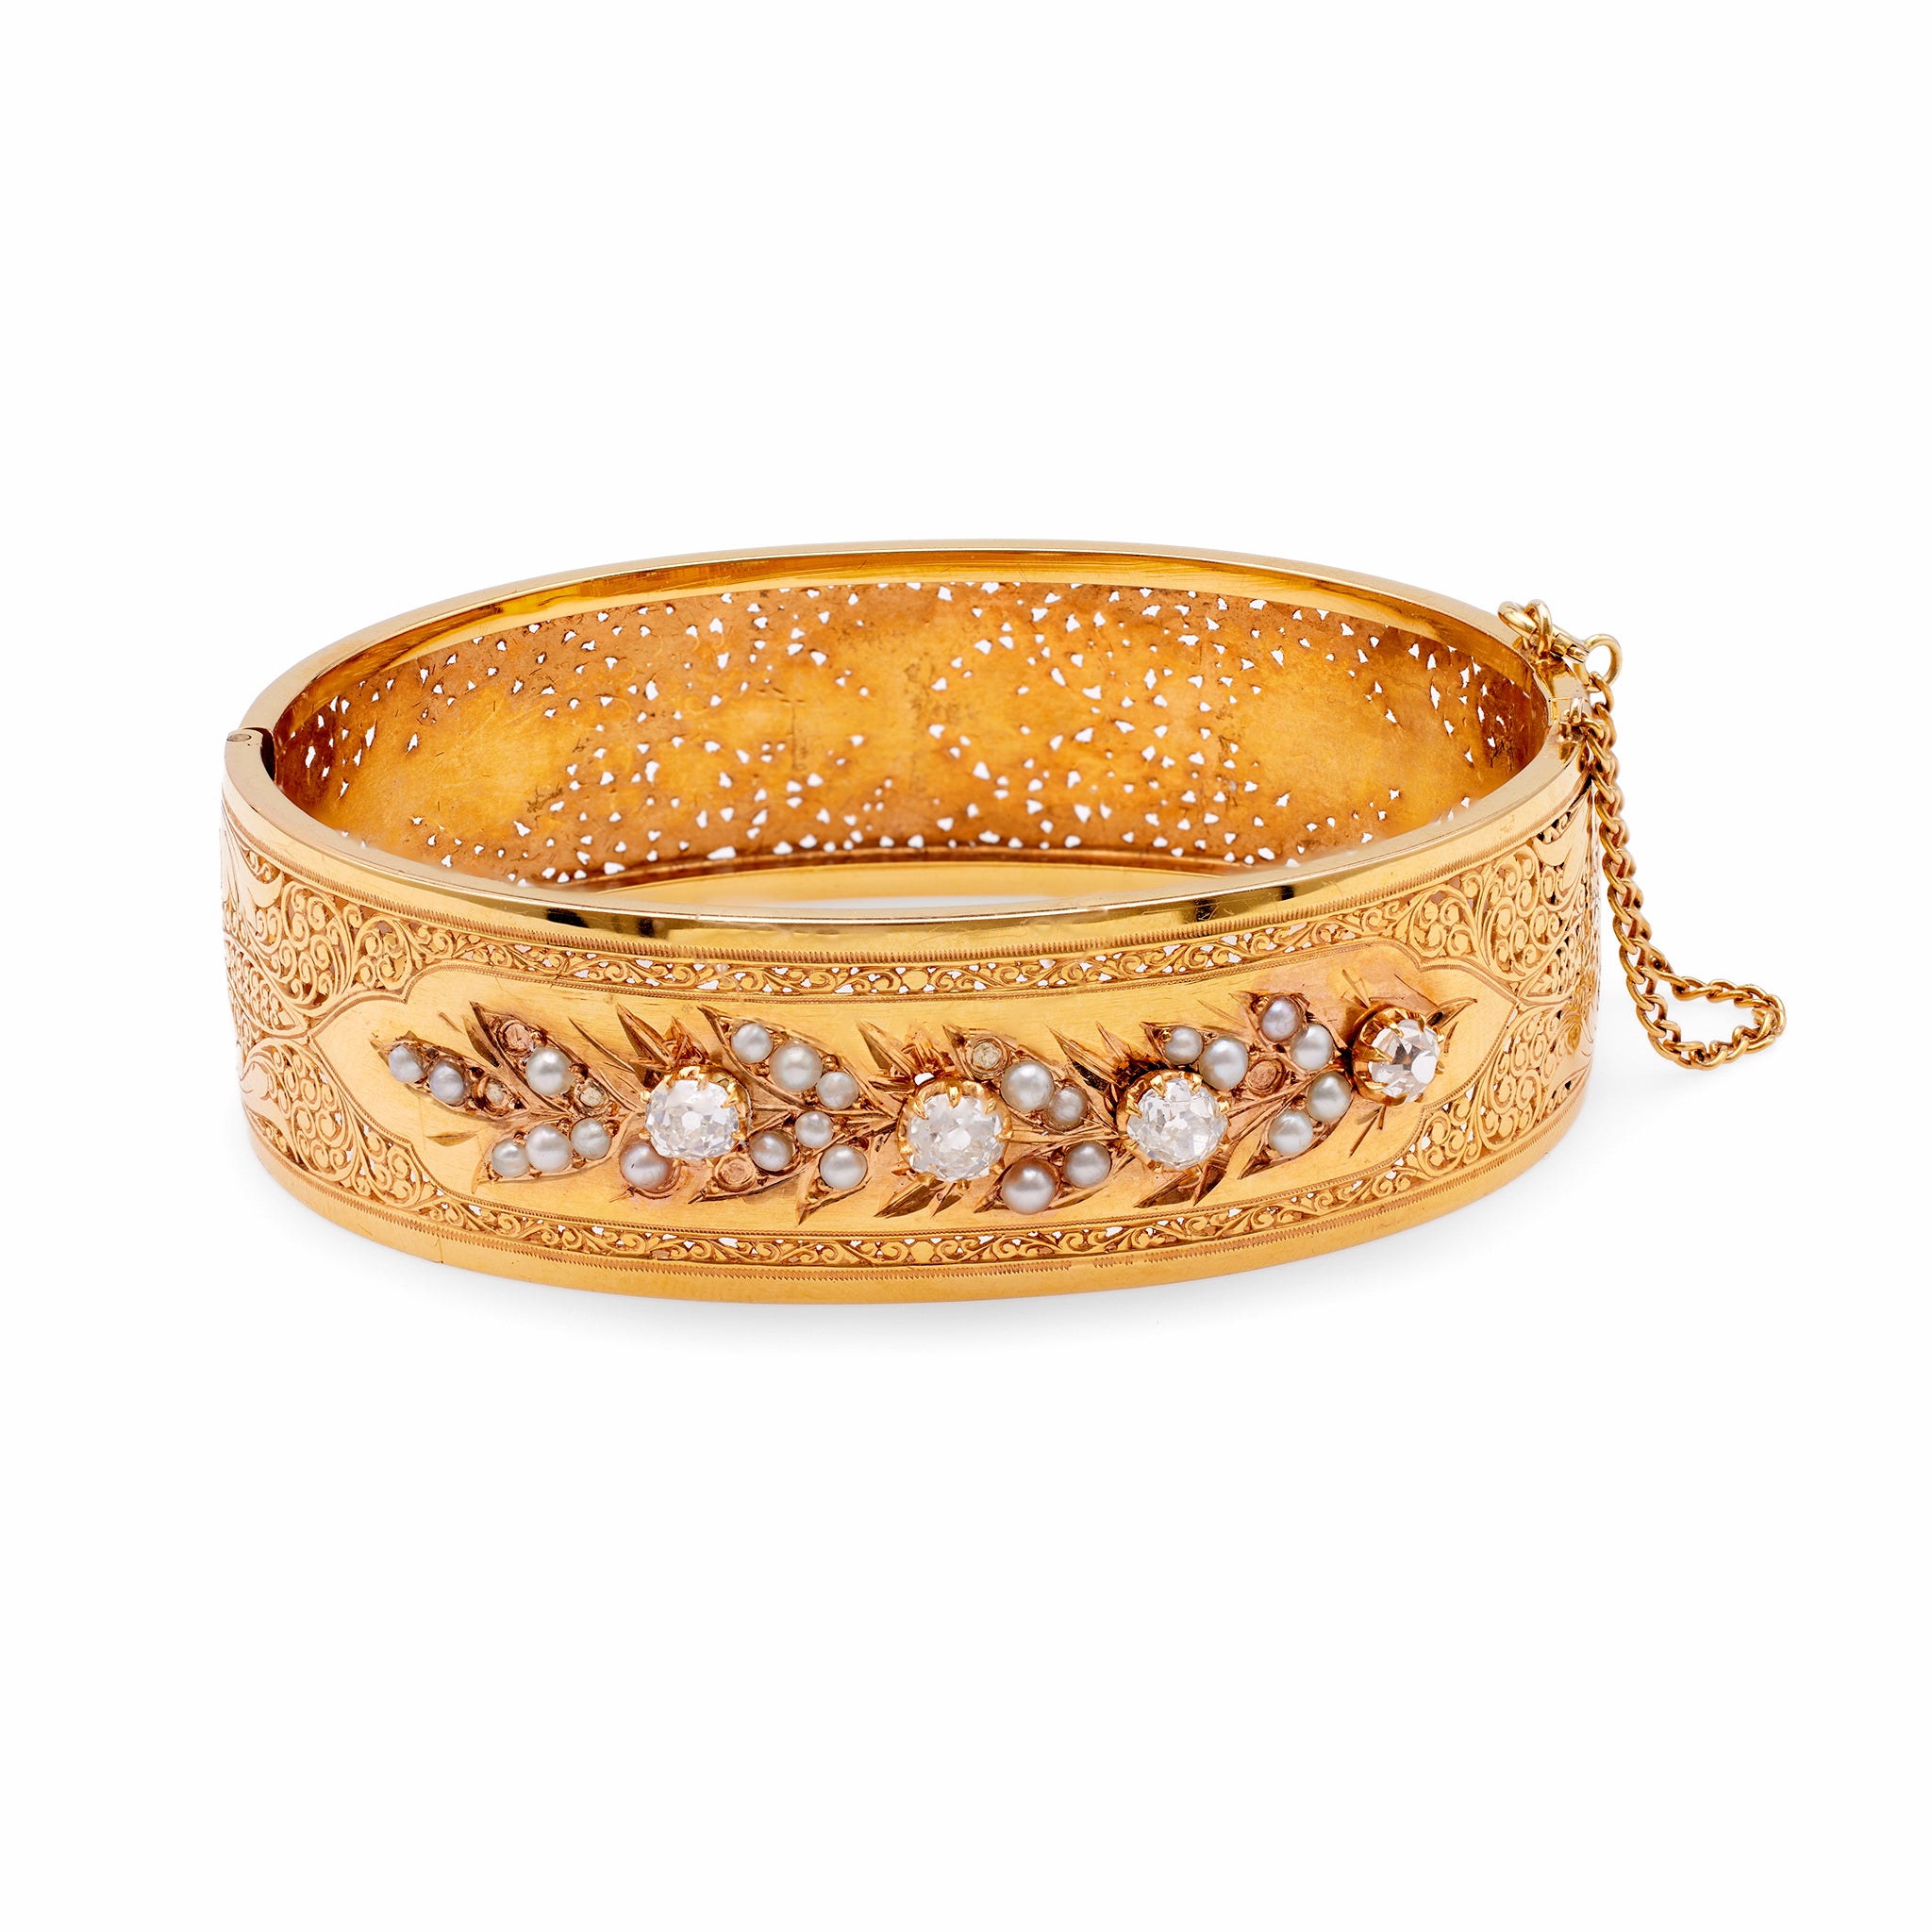 Belle Époque French Diamond and Pearl 18k Yellow Gold Bangle Bracelet Bracelets Jack Weir & Sons   